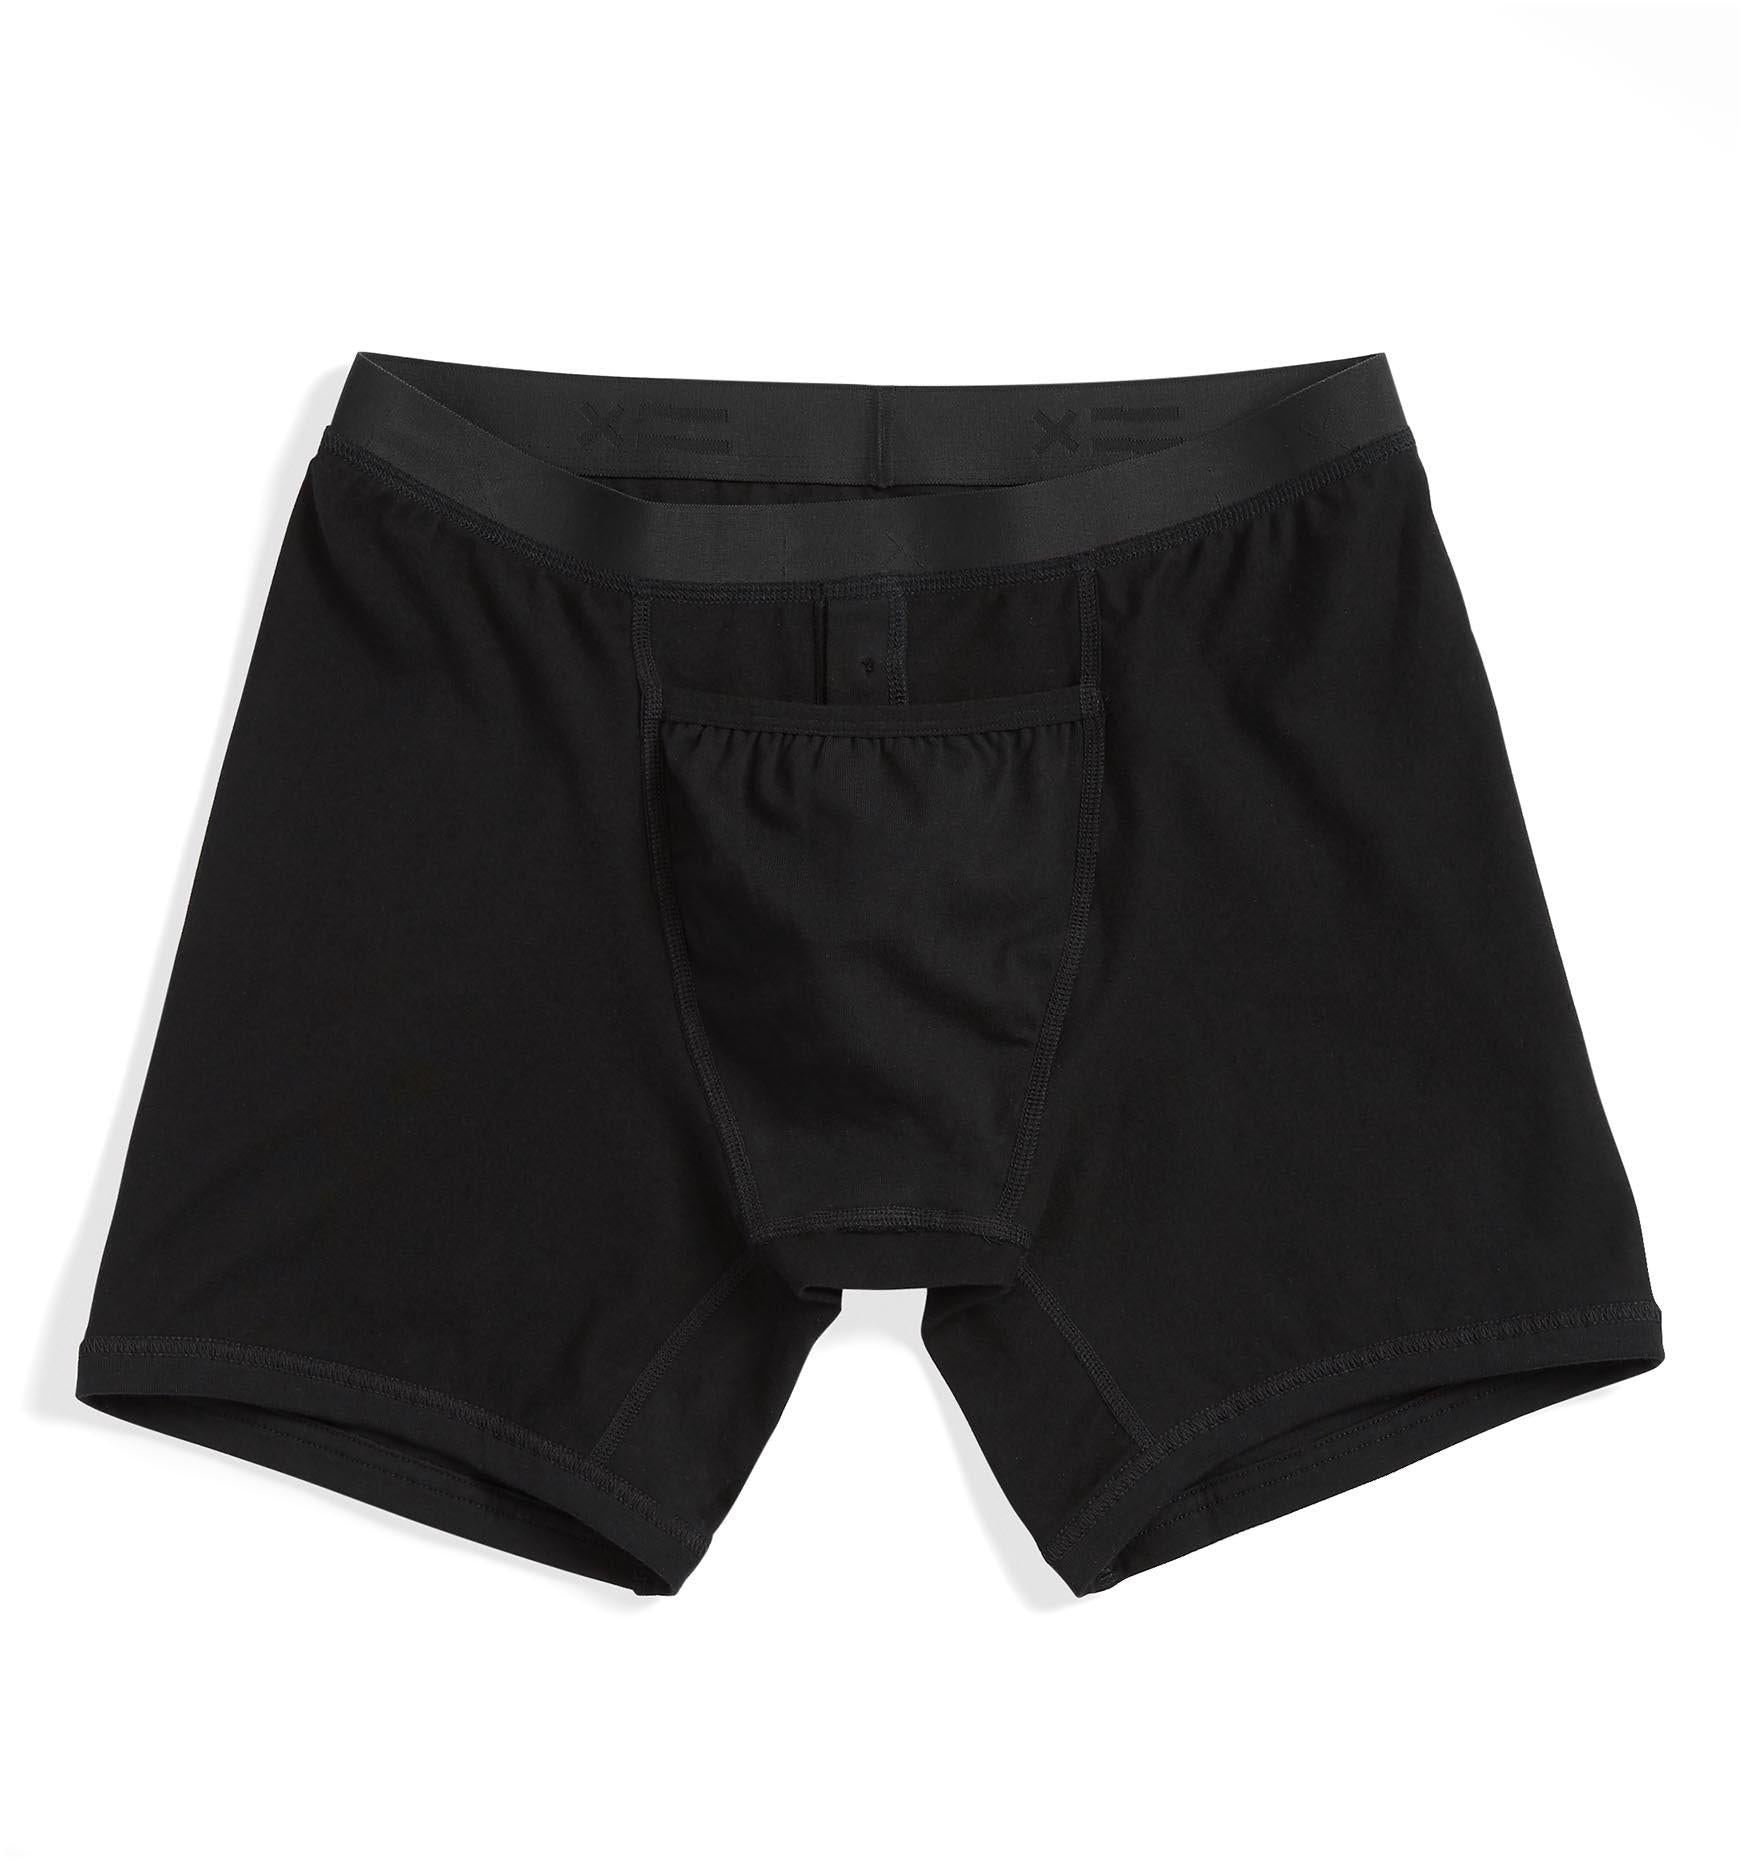 TomboyX First Line Period 9 Boxer Briefs 3-Pack - Black X= Rainbow on  Marmalade